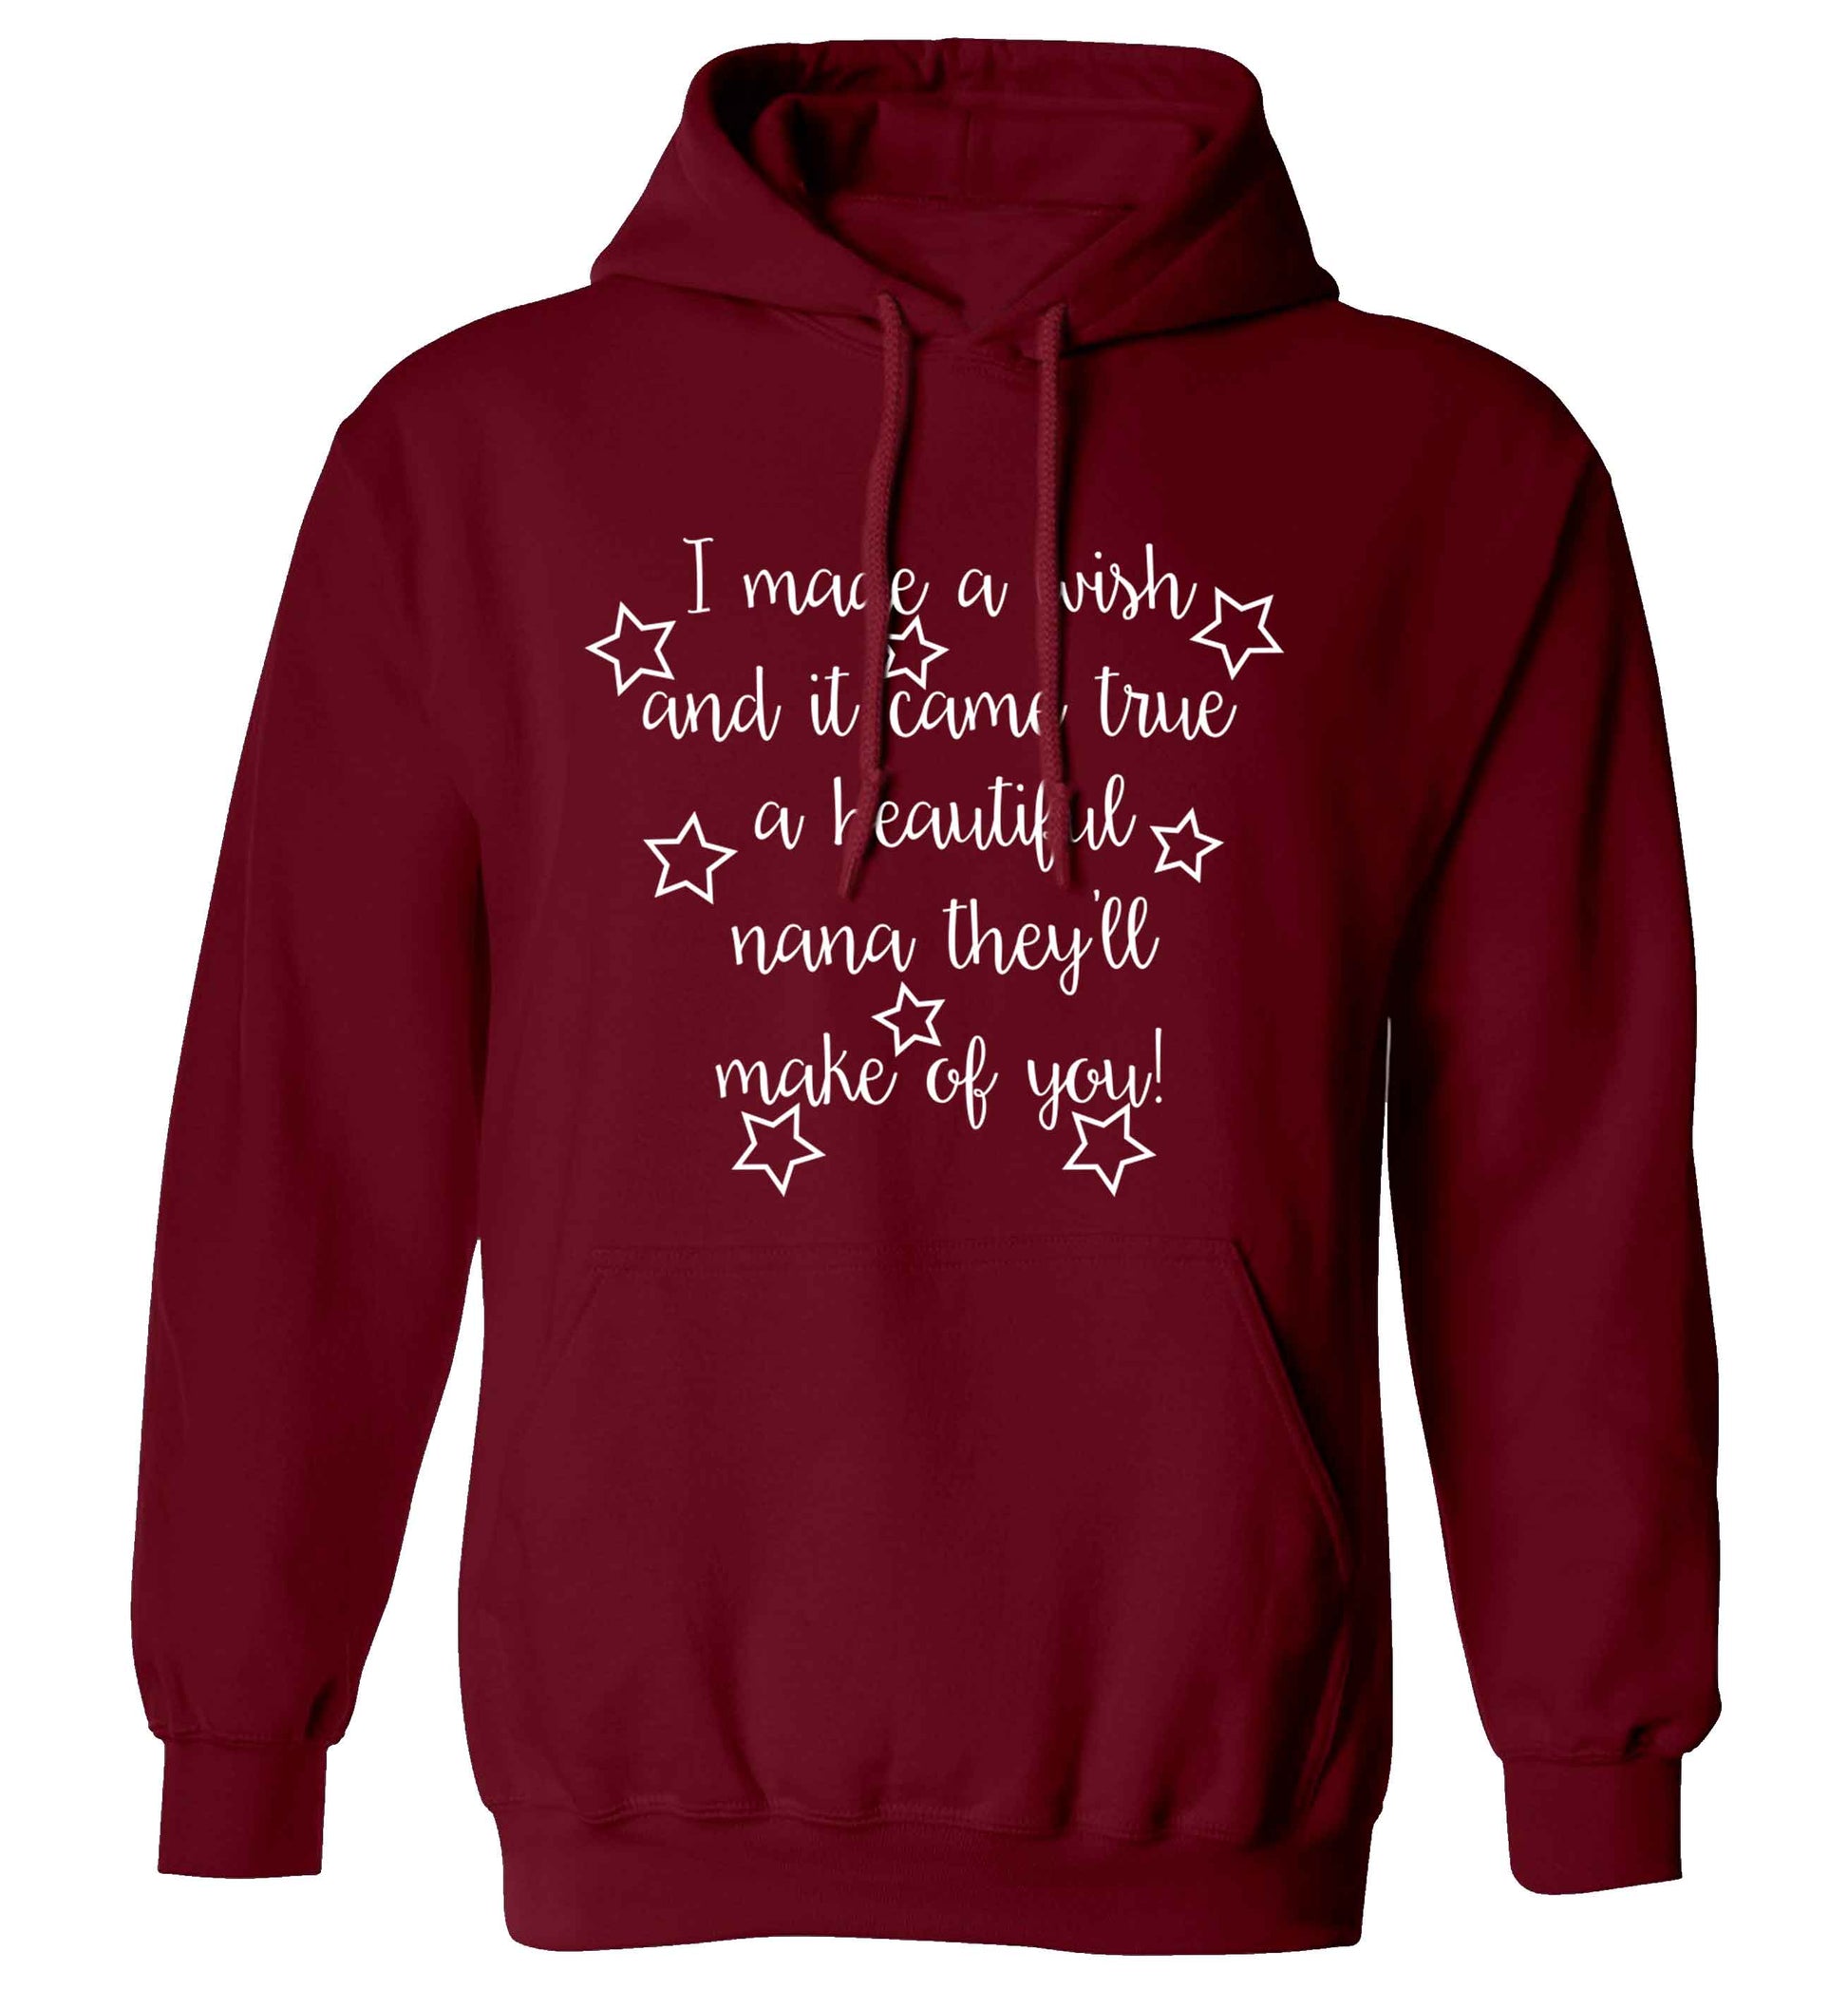 I made a wish and it came true a beautiful nana they'll make of you! adults unisex maroon hoodie 2XL